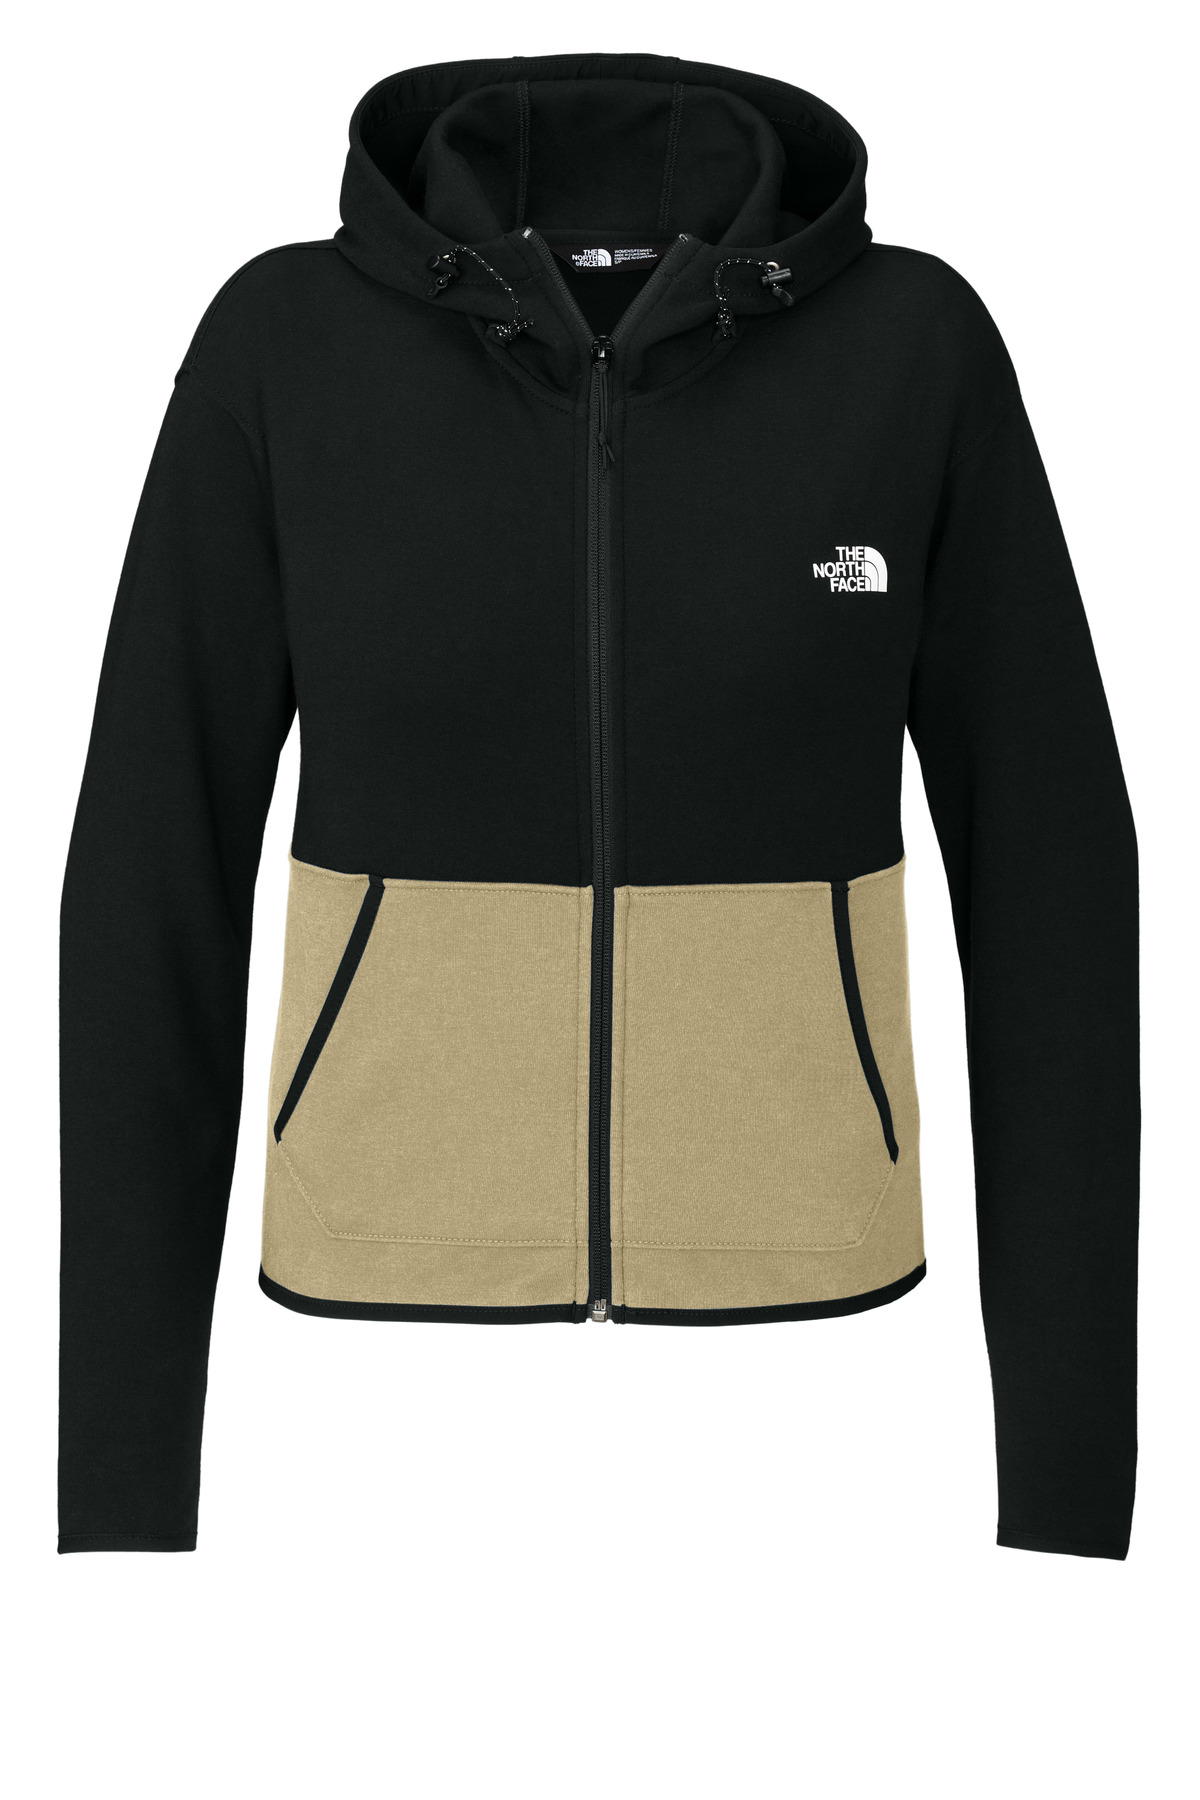 The North Face Ladies Double-Knit Full-Zip Hoodie-The North Face